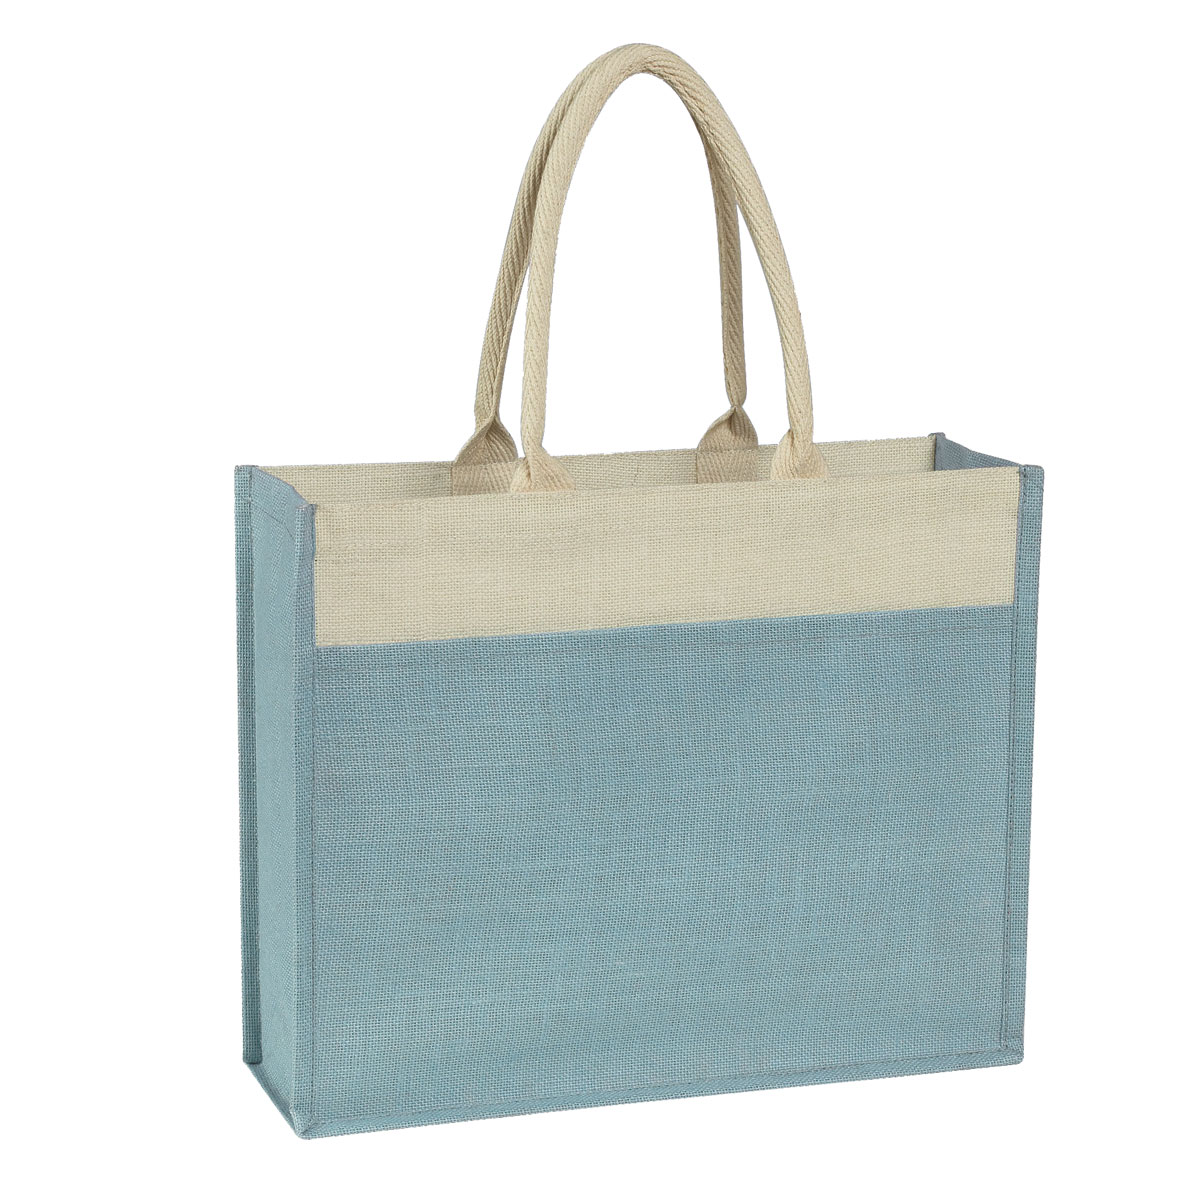  Jute Tote Bag With Front Pocket 3617